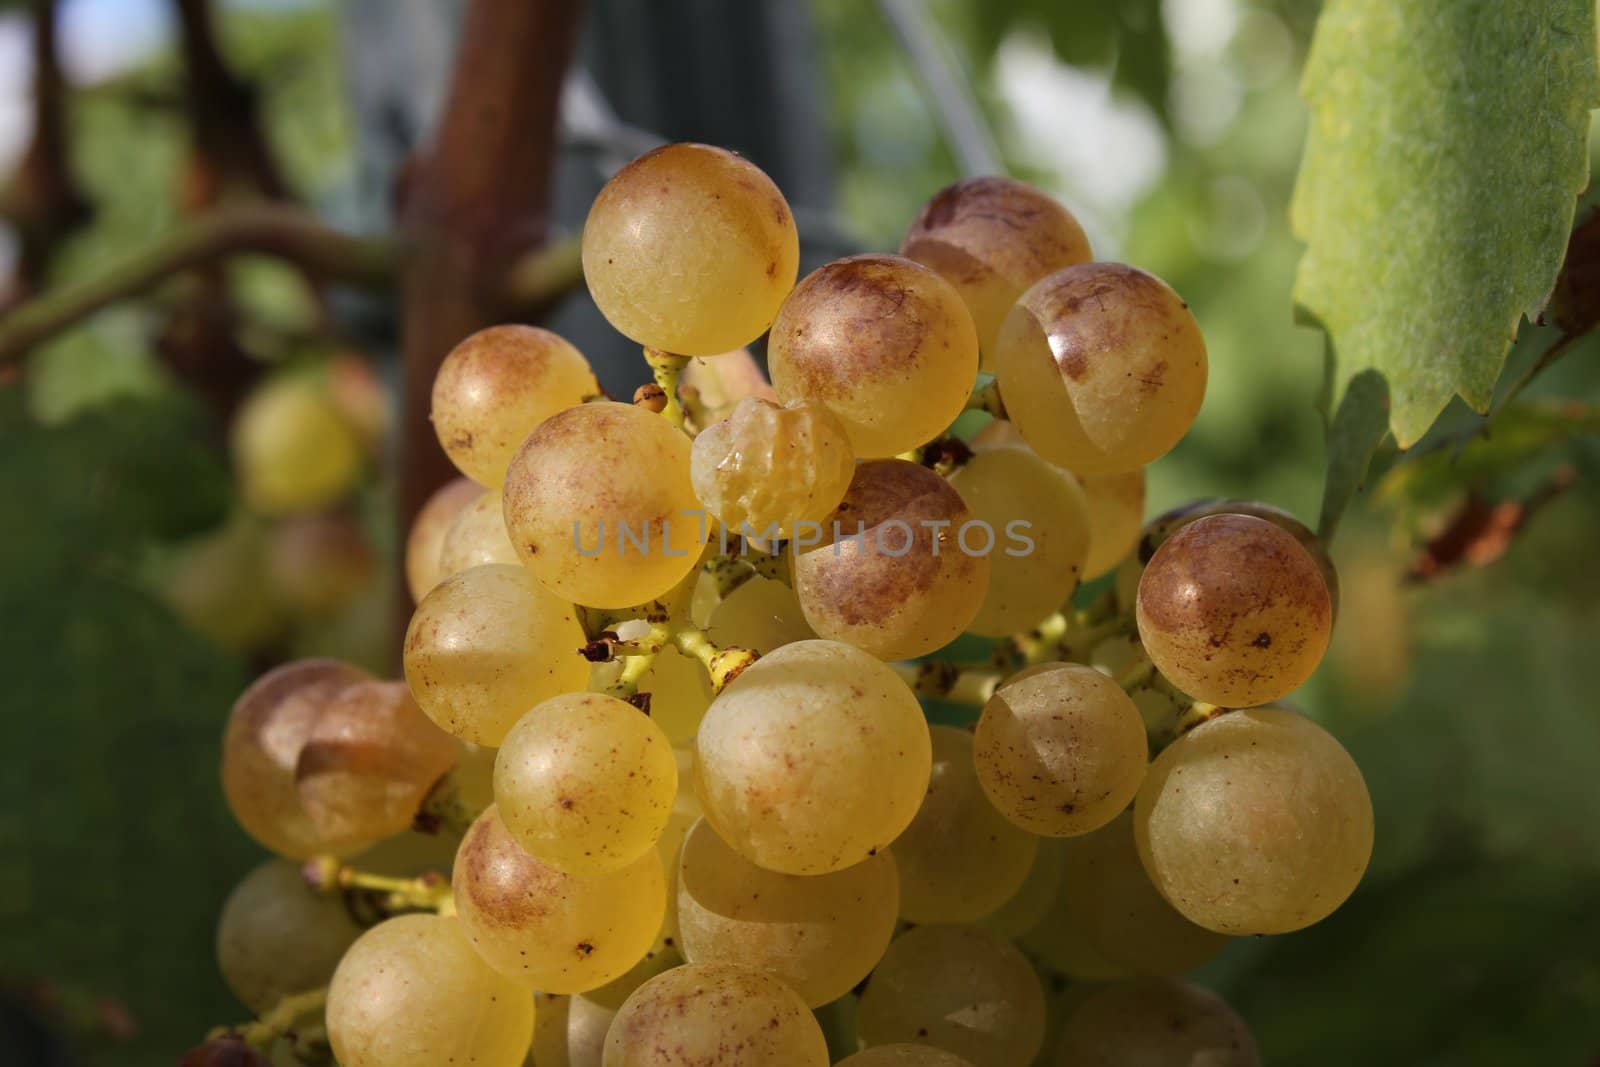 grapes by mariephotos